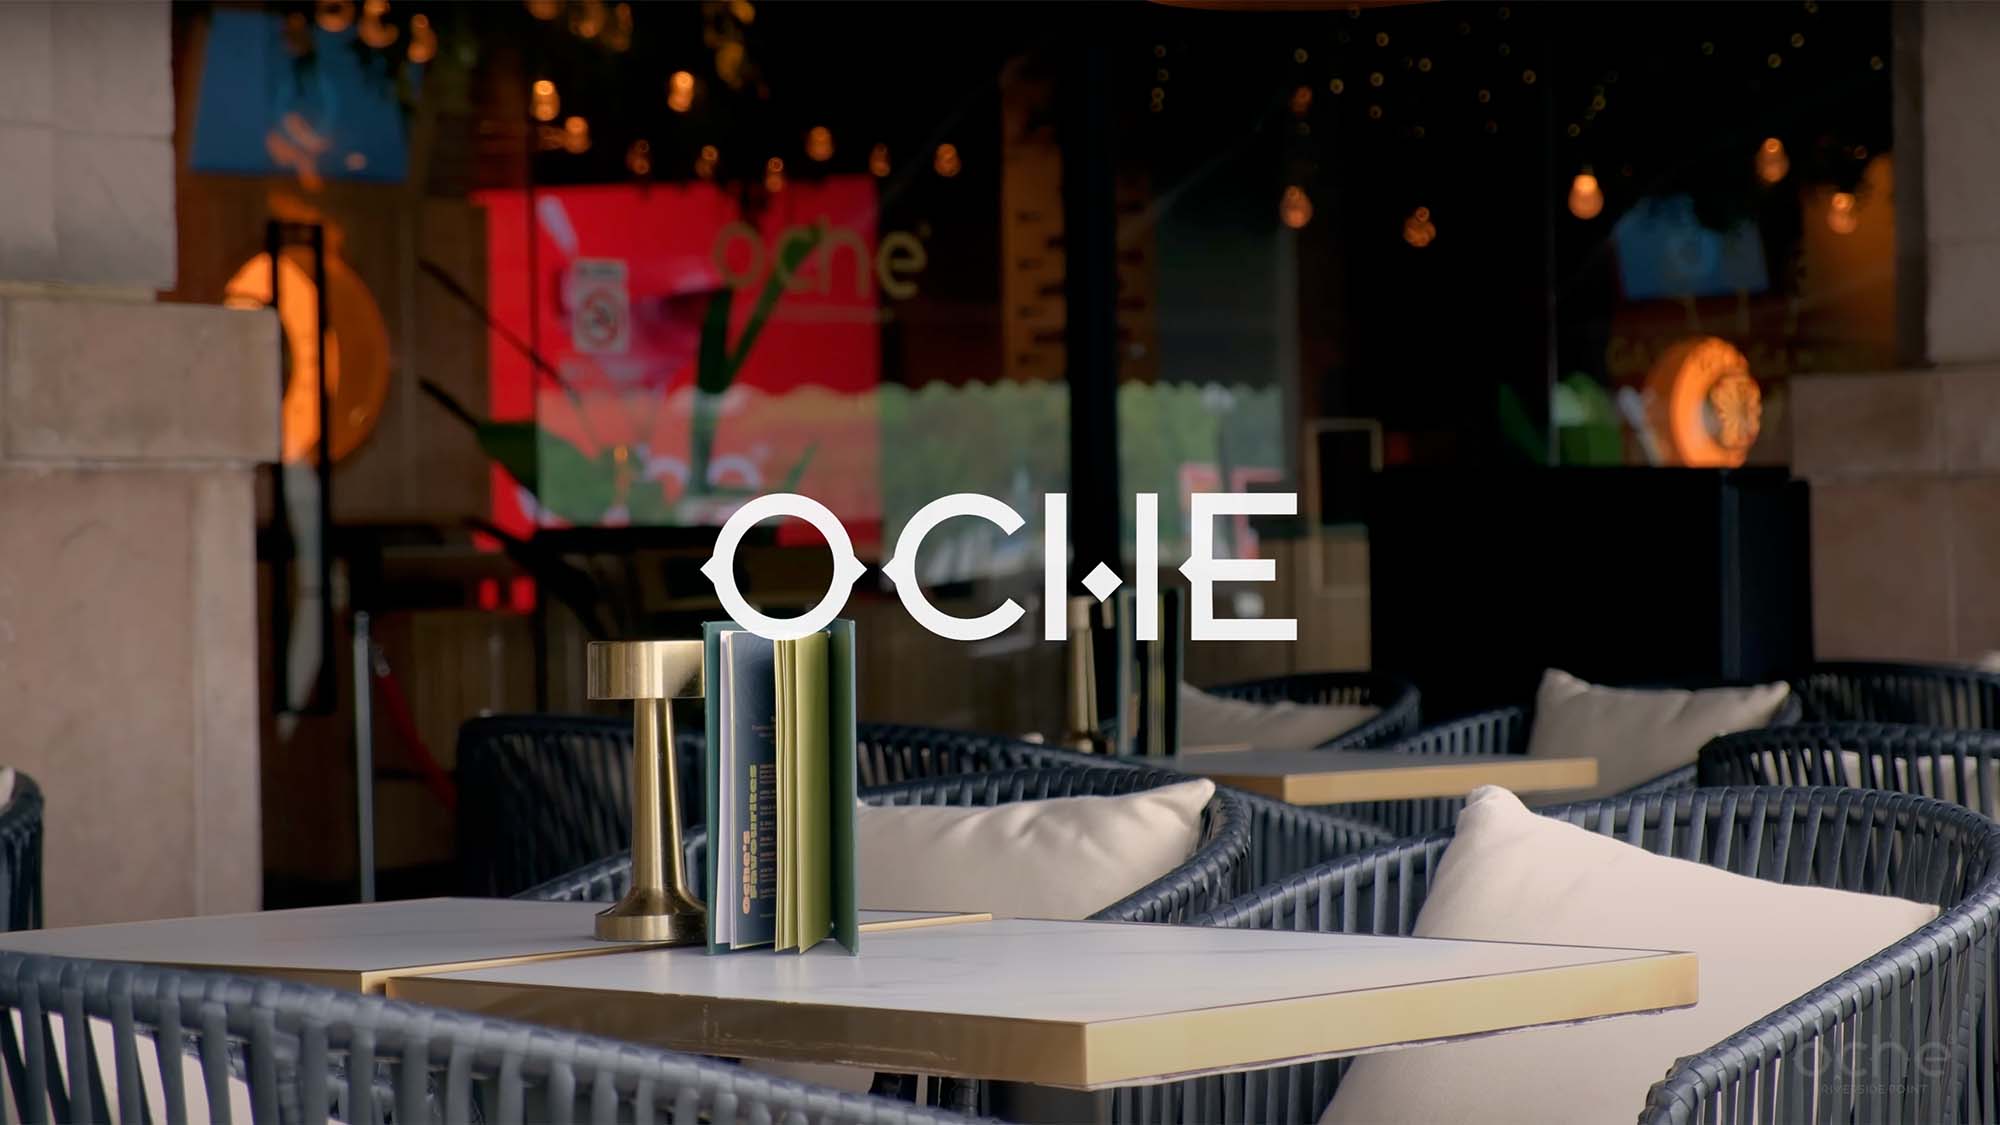 Oche Restaurant video for Drinks in Singapore and Paris by COCO Creative Studio